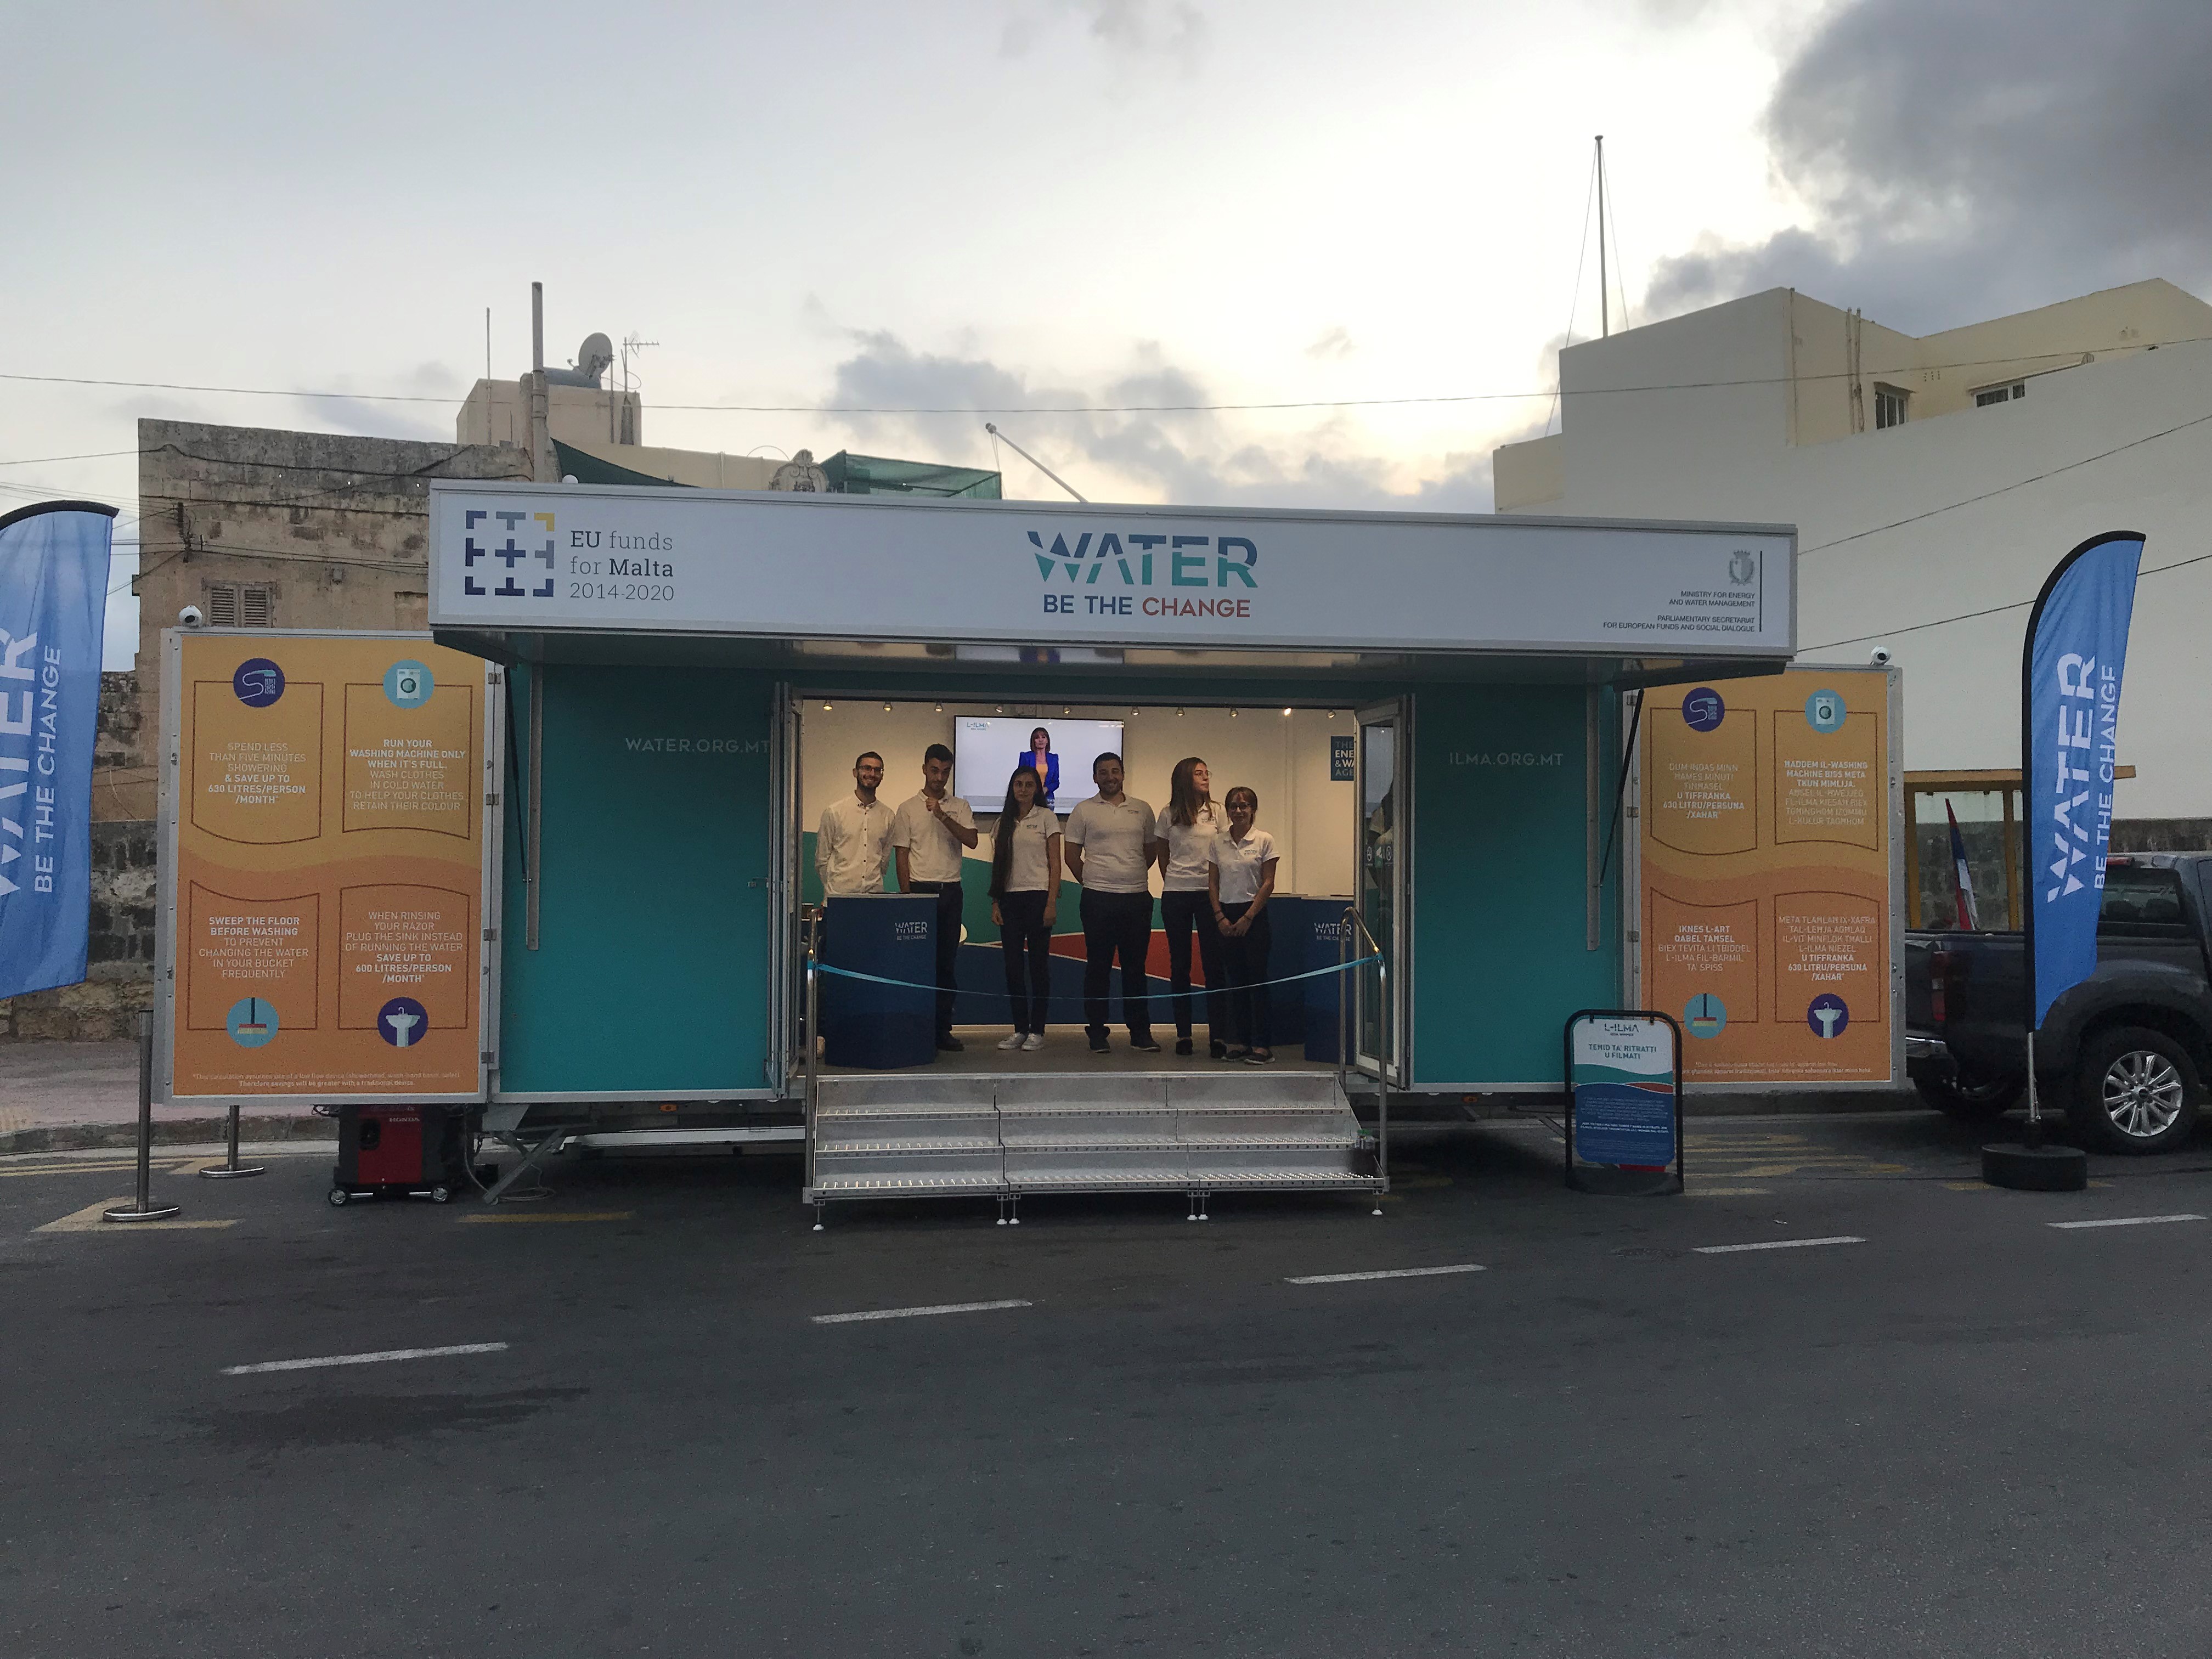 The water campaign mobile unit will be in Valletta during March